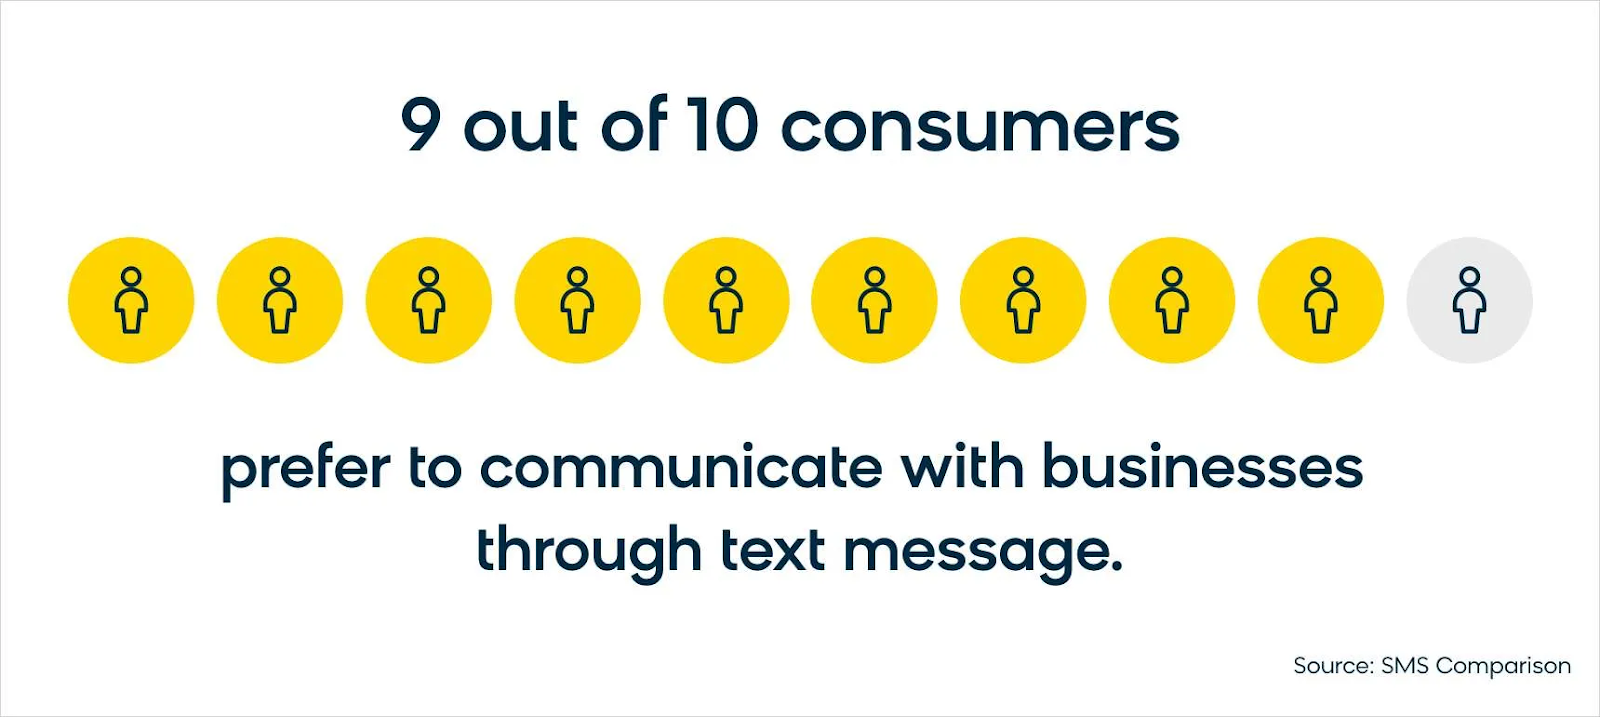 9 out of 10 customers prefer to communicate with businesses through text message